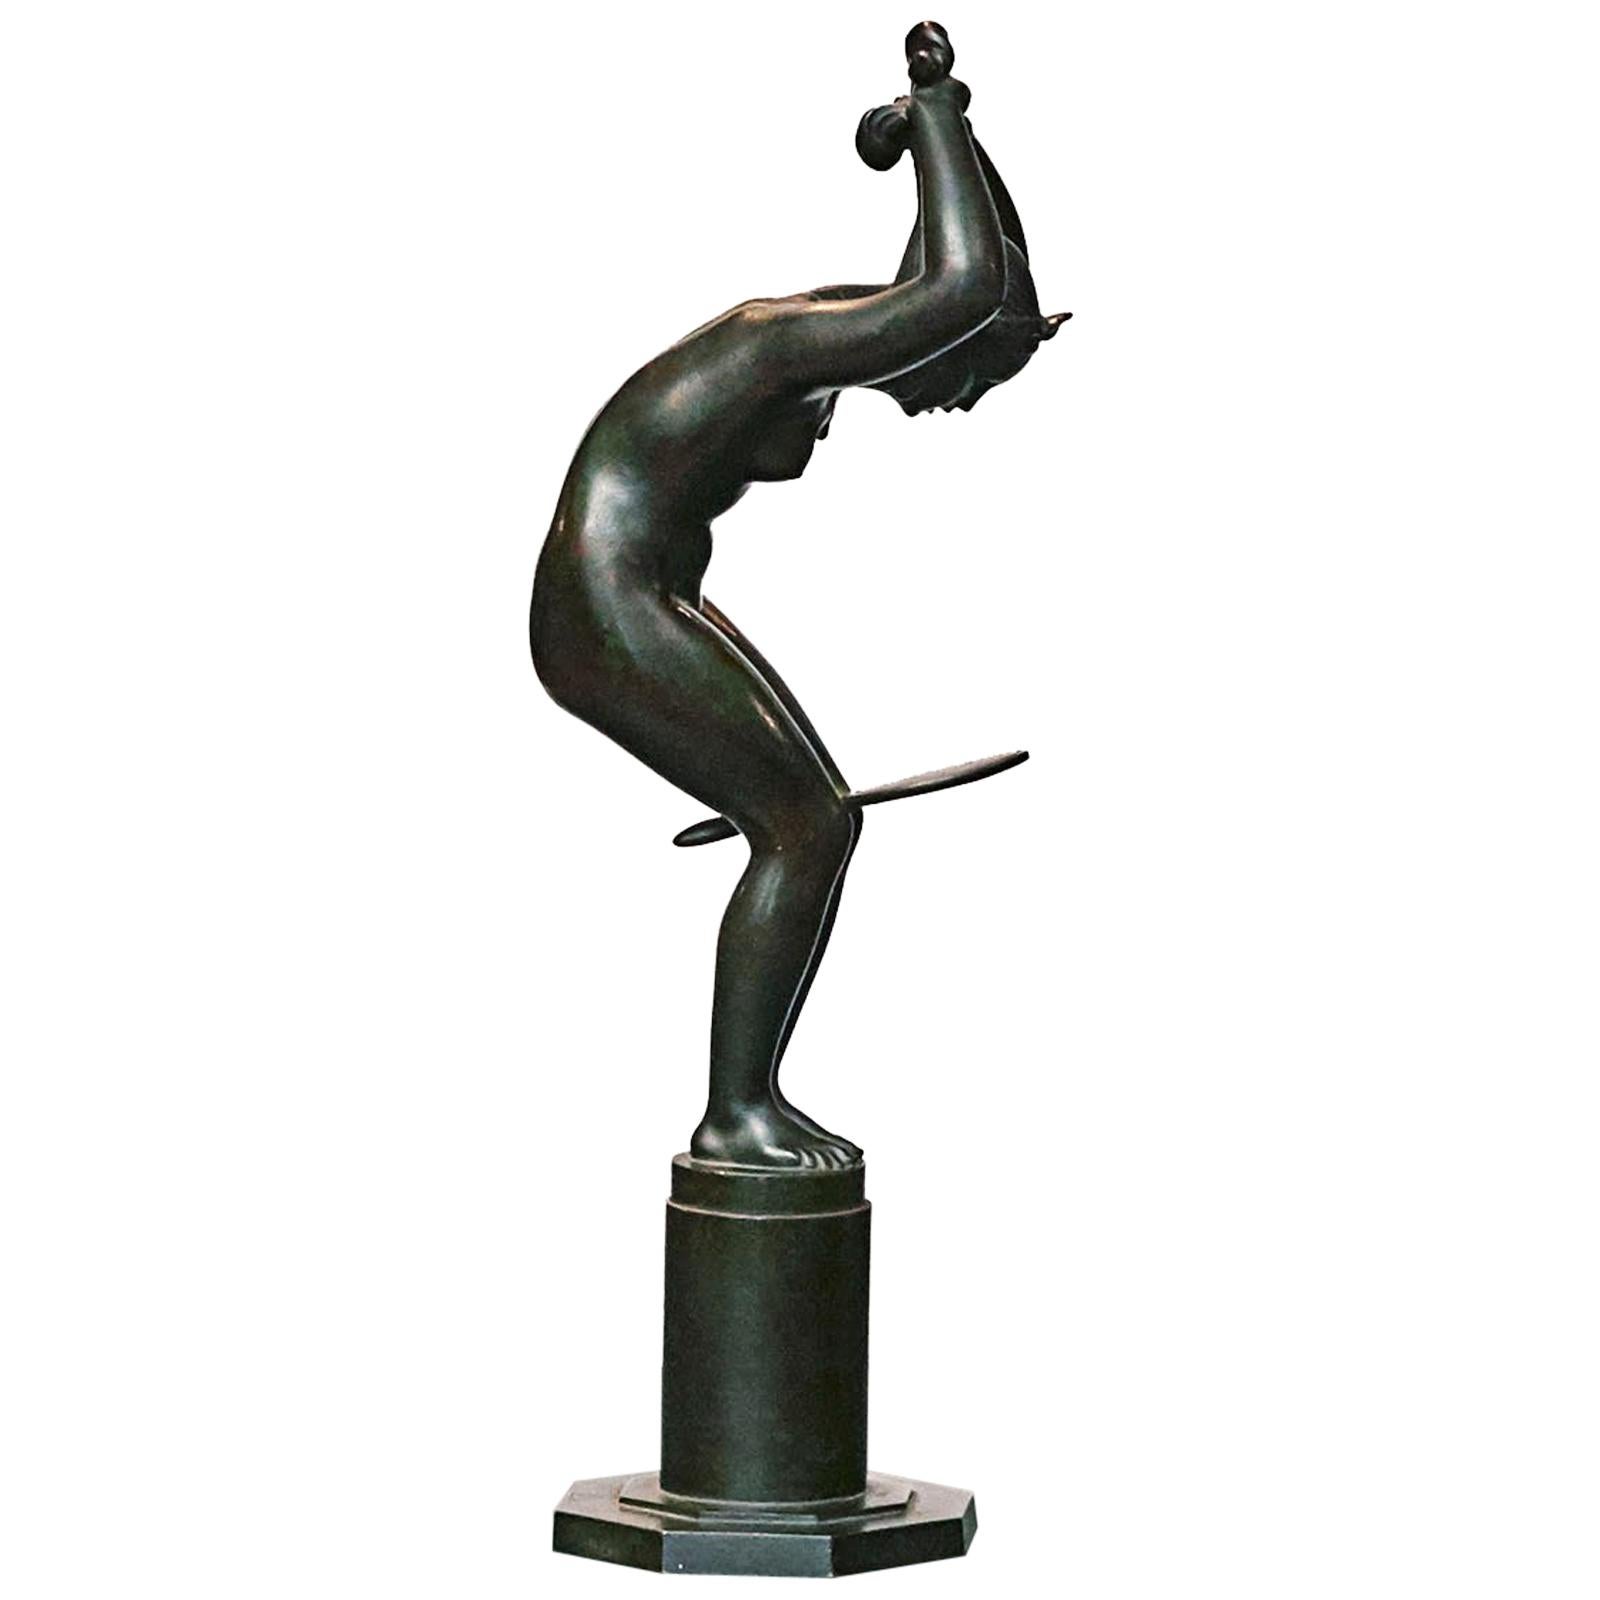 Jens Jacob Bregnø (1877-1946).
A dark patinated bronze sculpture of a nude woman braiding her hair while holding a mirror between her knees.
Signed with monogram to the base JJB.
On custom-made oak plinth.